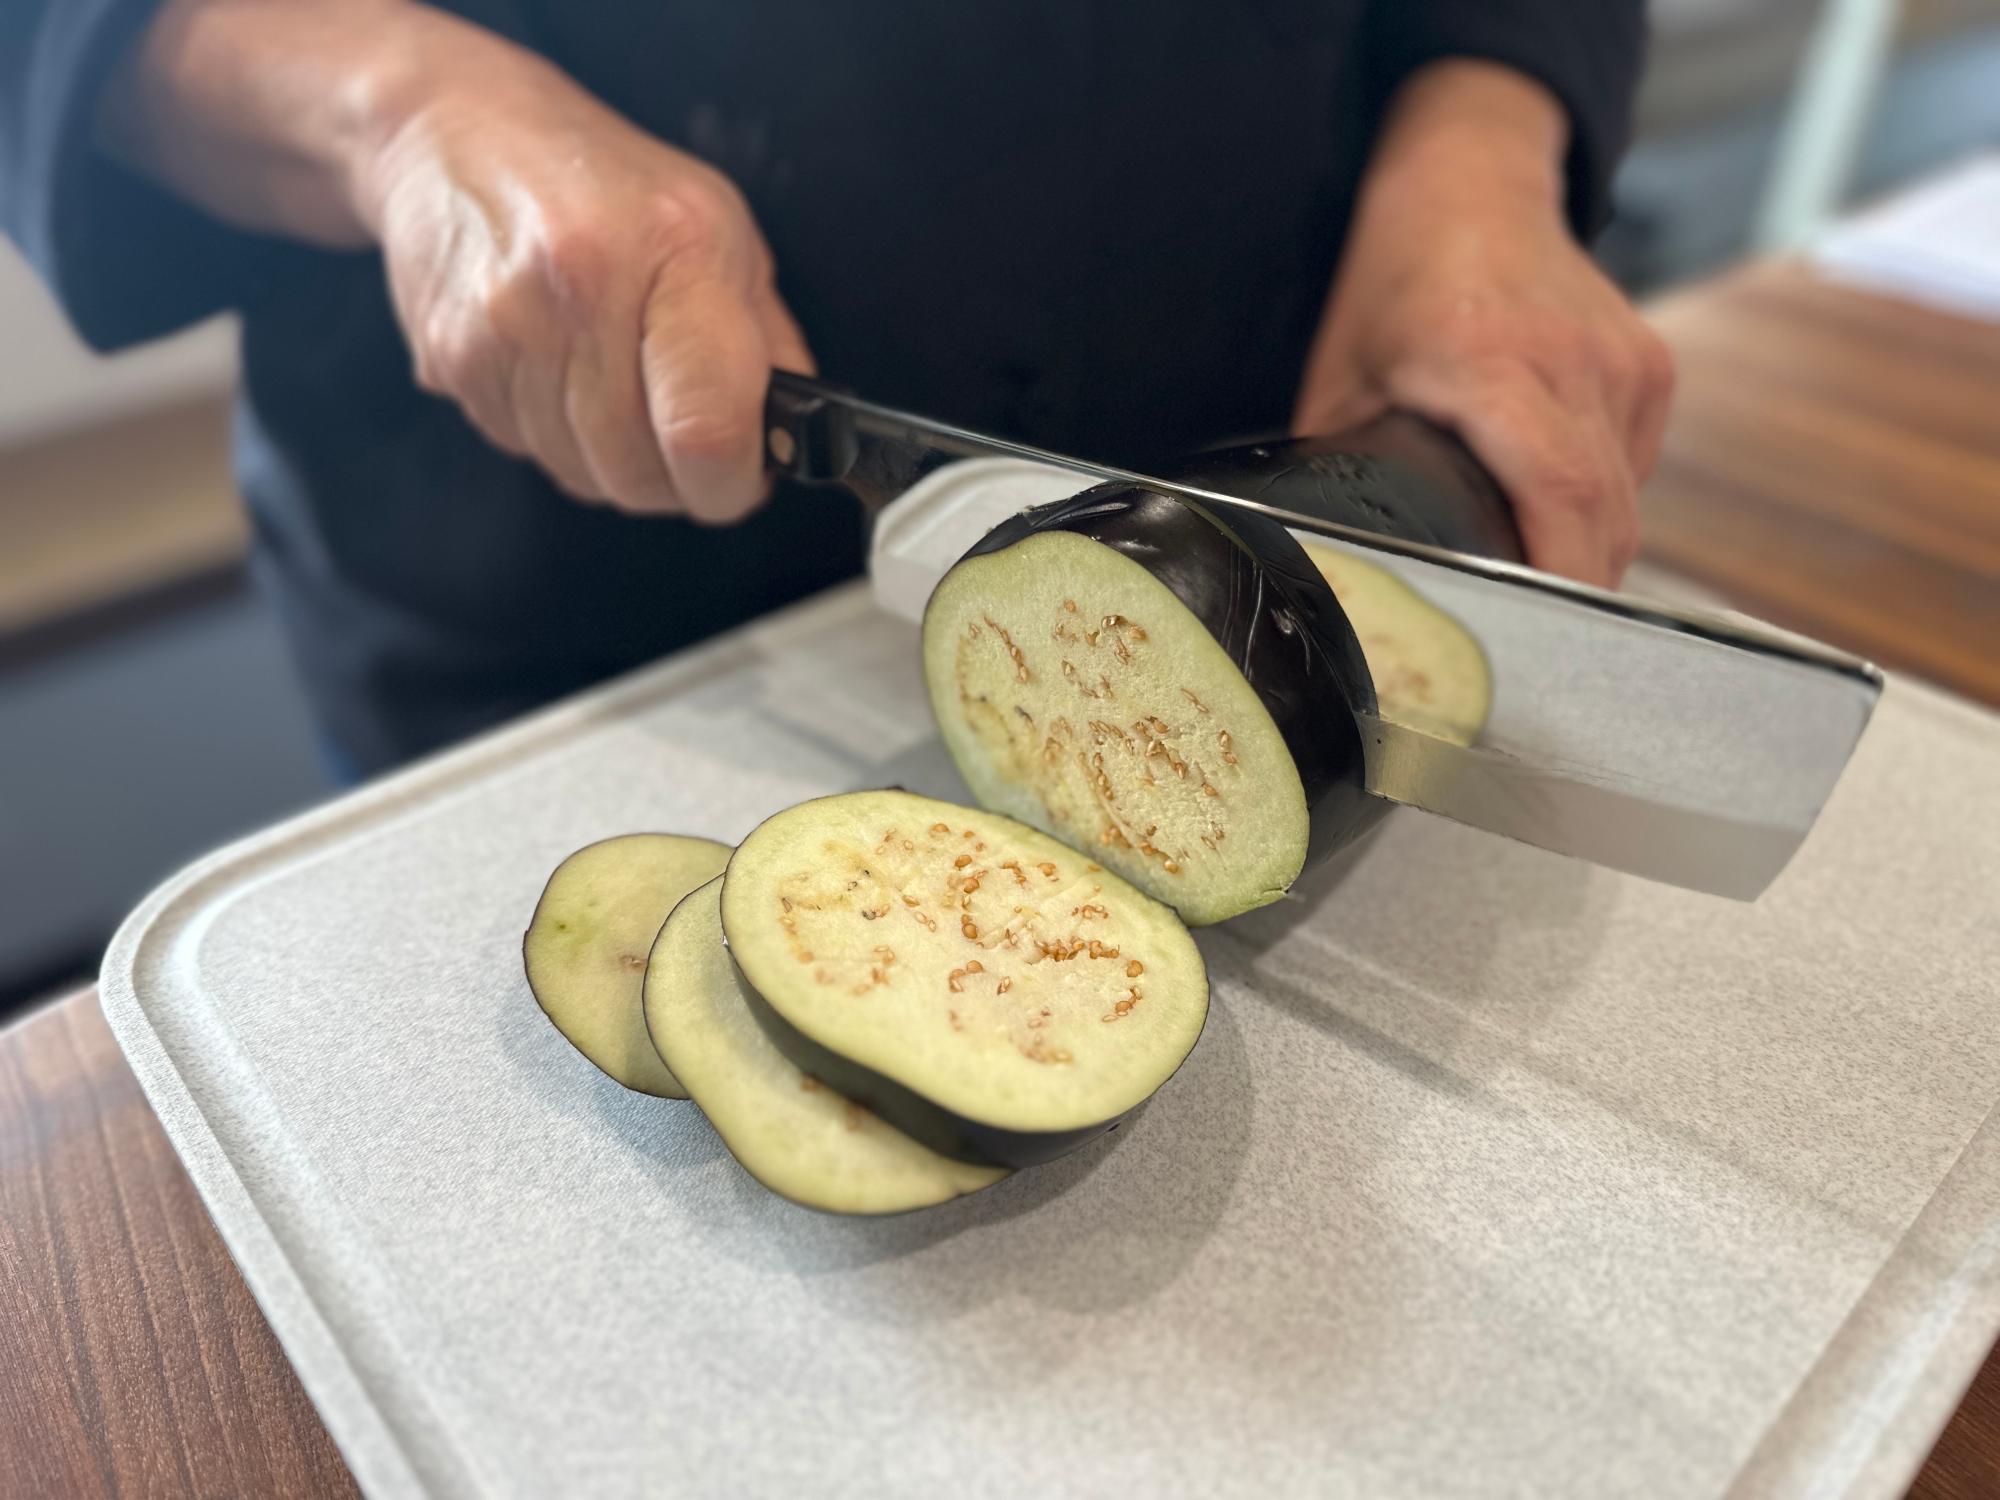 Slicing the eggplant with a Vegetable Knife.